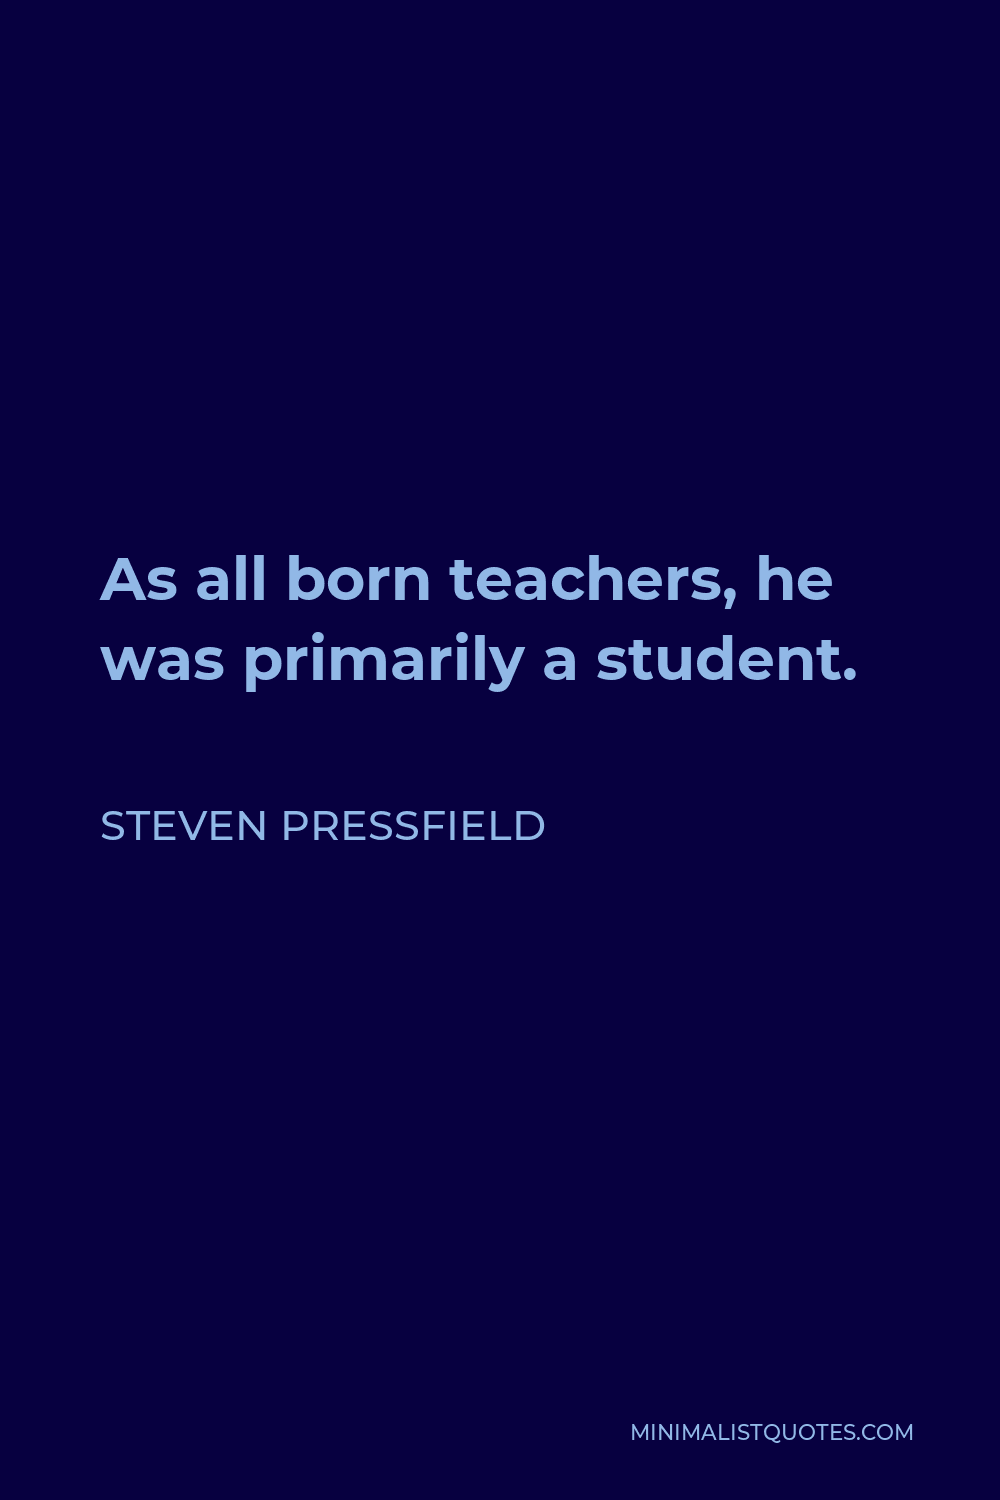 Steven Pressfield Quote - As all born teachers, he was primarily a student.